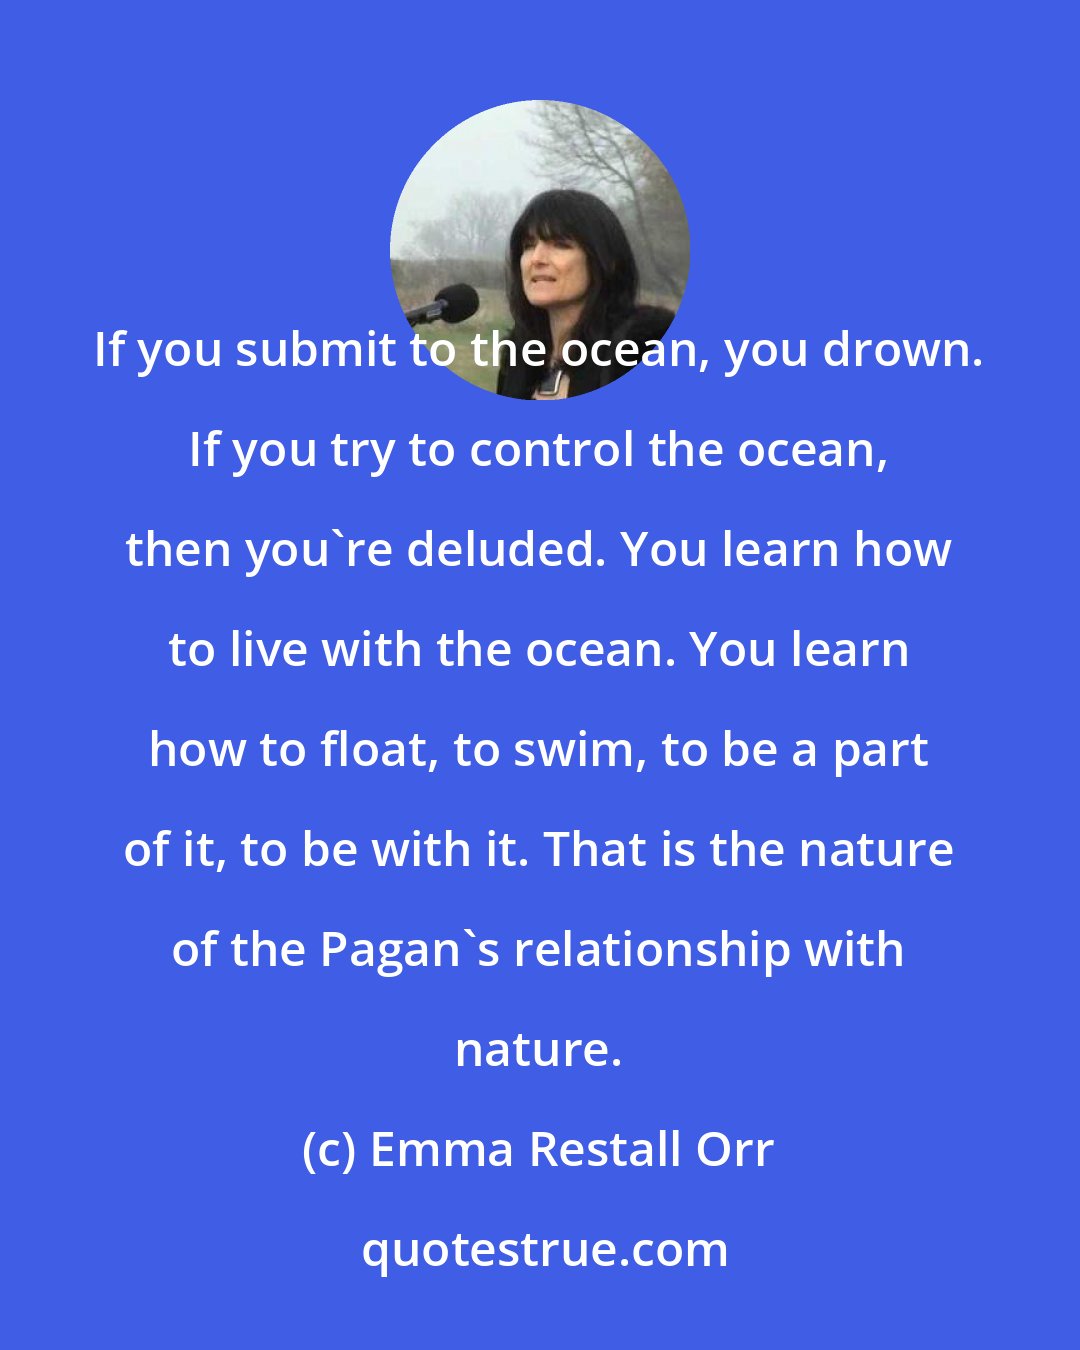 Emma Restall Orr: If you submit to the ocean, you drown. If you try to control the ocean, then you're deluded. You learn how to live with the ocean. You learn how to float, to swim, to be a part of it, to be with it. That is the nature of the Pagan's relationship with nature.